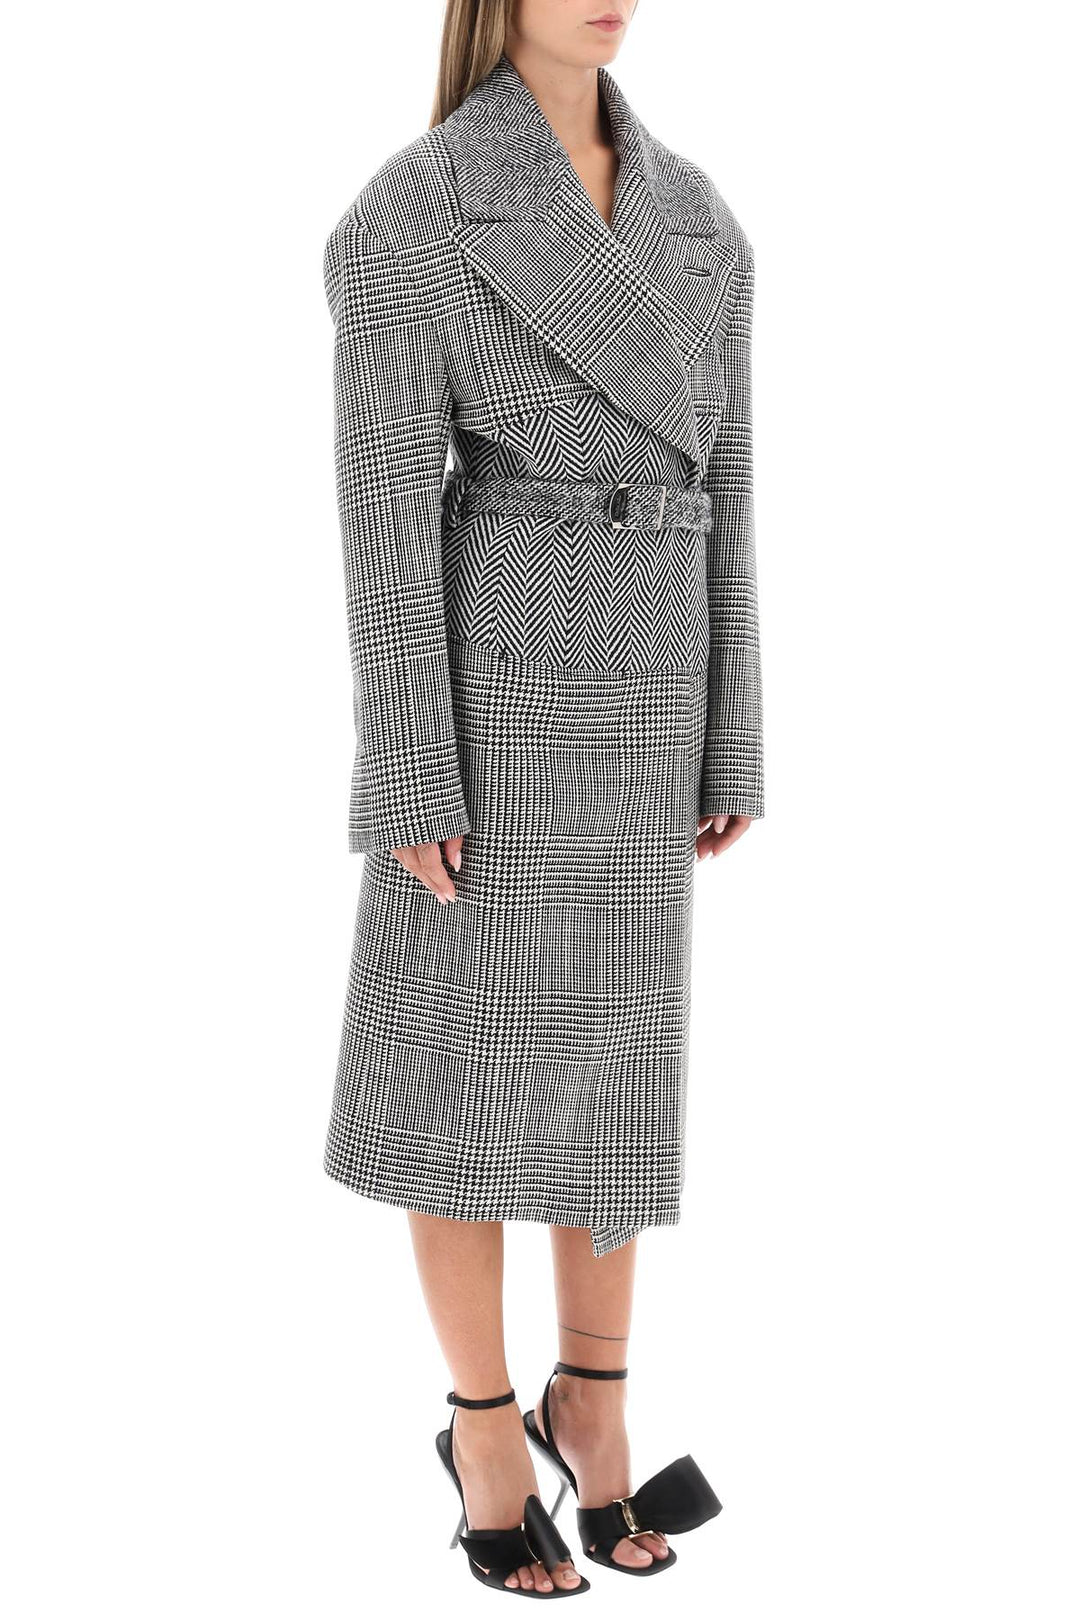 Cappotto Patchwork In Cashmere - Tom Ford - Donna